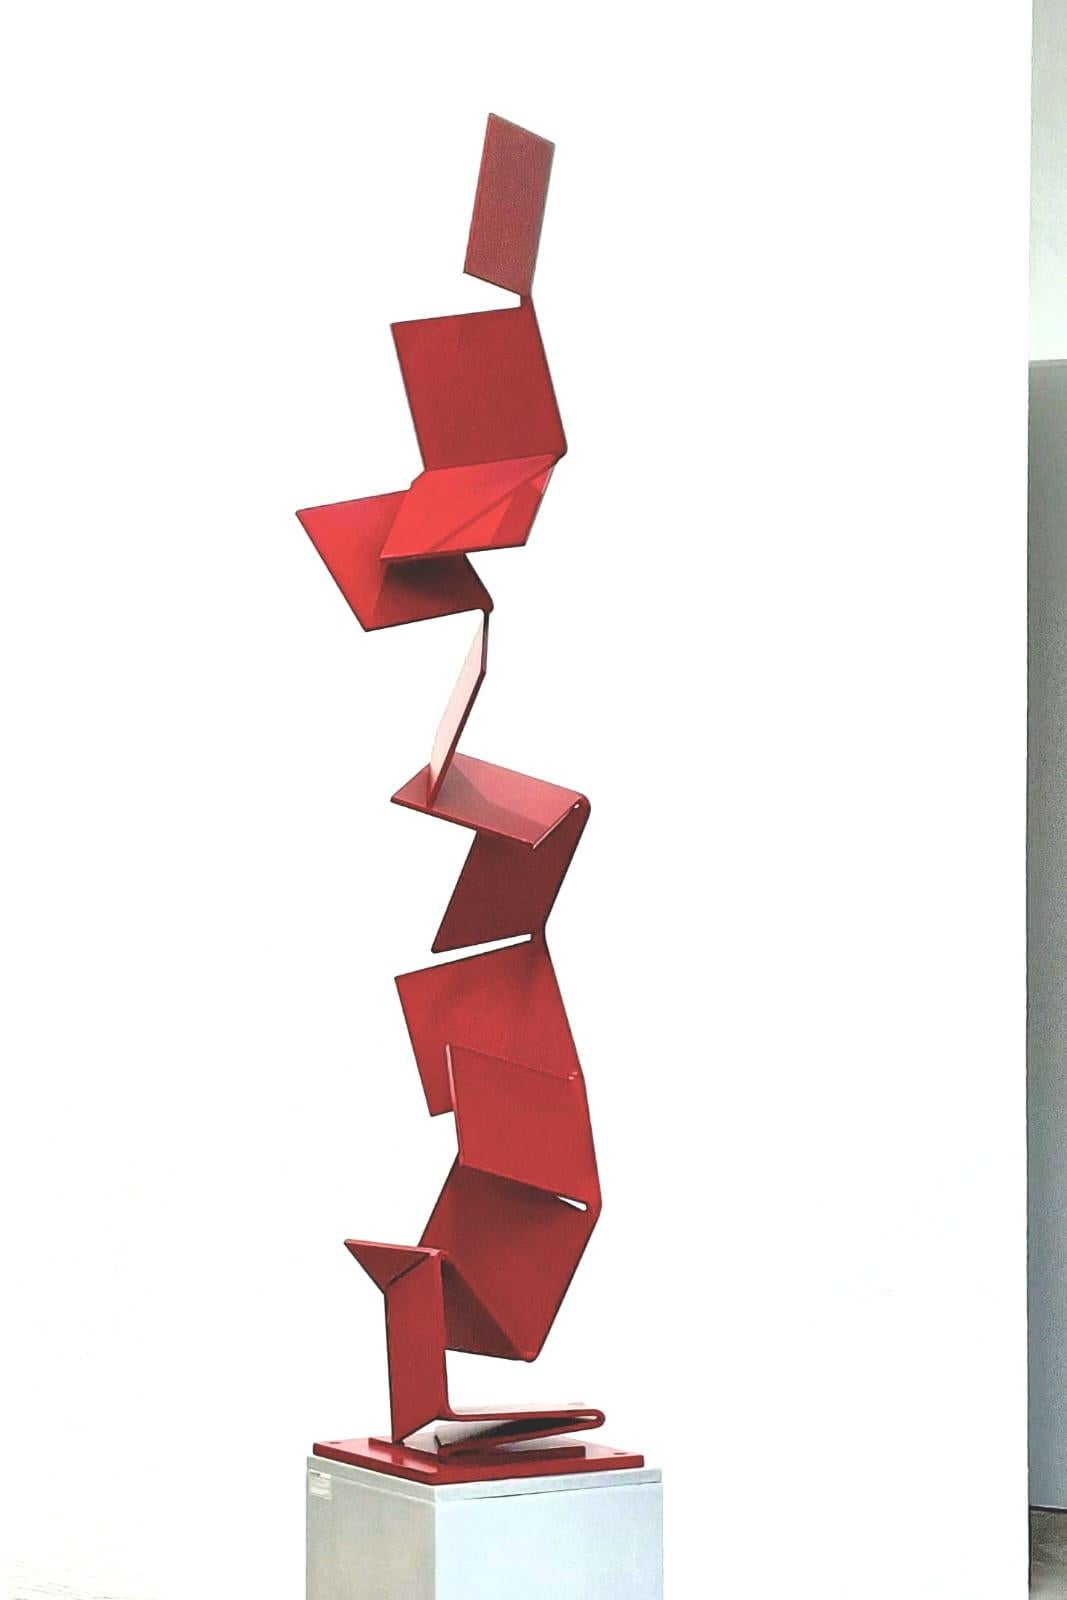 Aspire Upwards by Kuno Vollet - Contemporary Red Steel sculpture for Outdoors For Sale 7